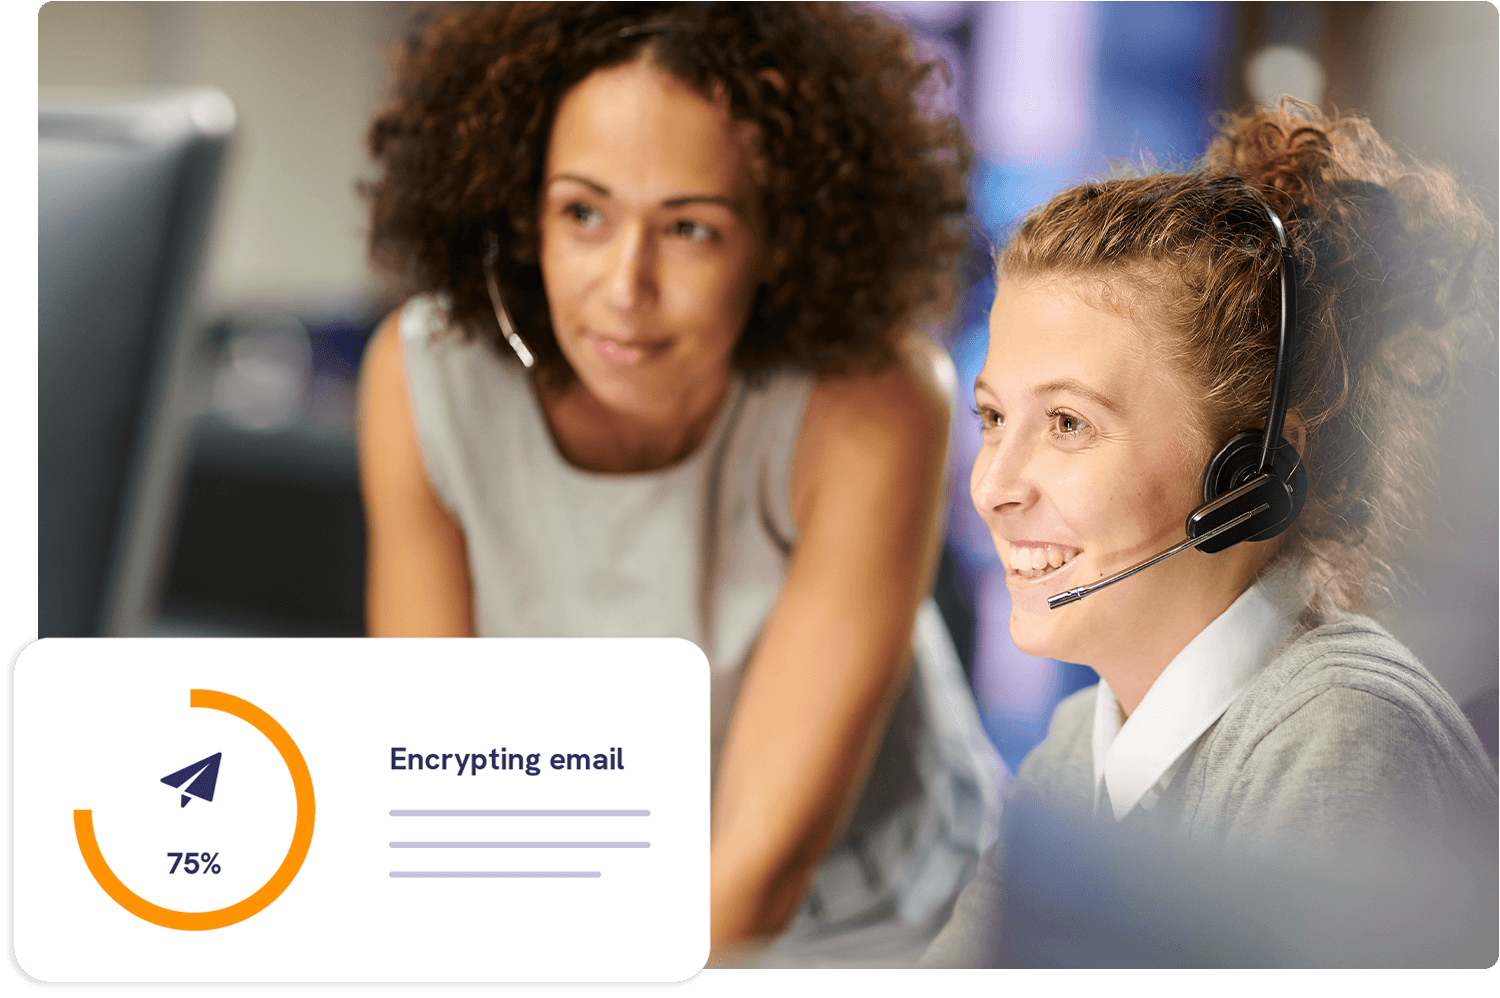 Customer service rep securing emails with Mailock